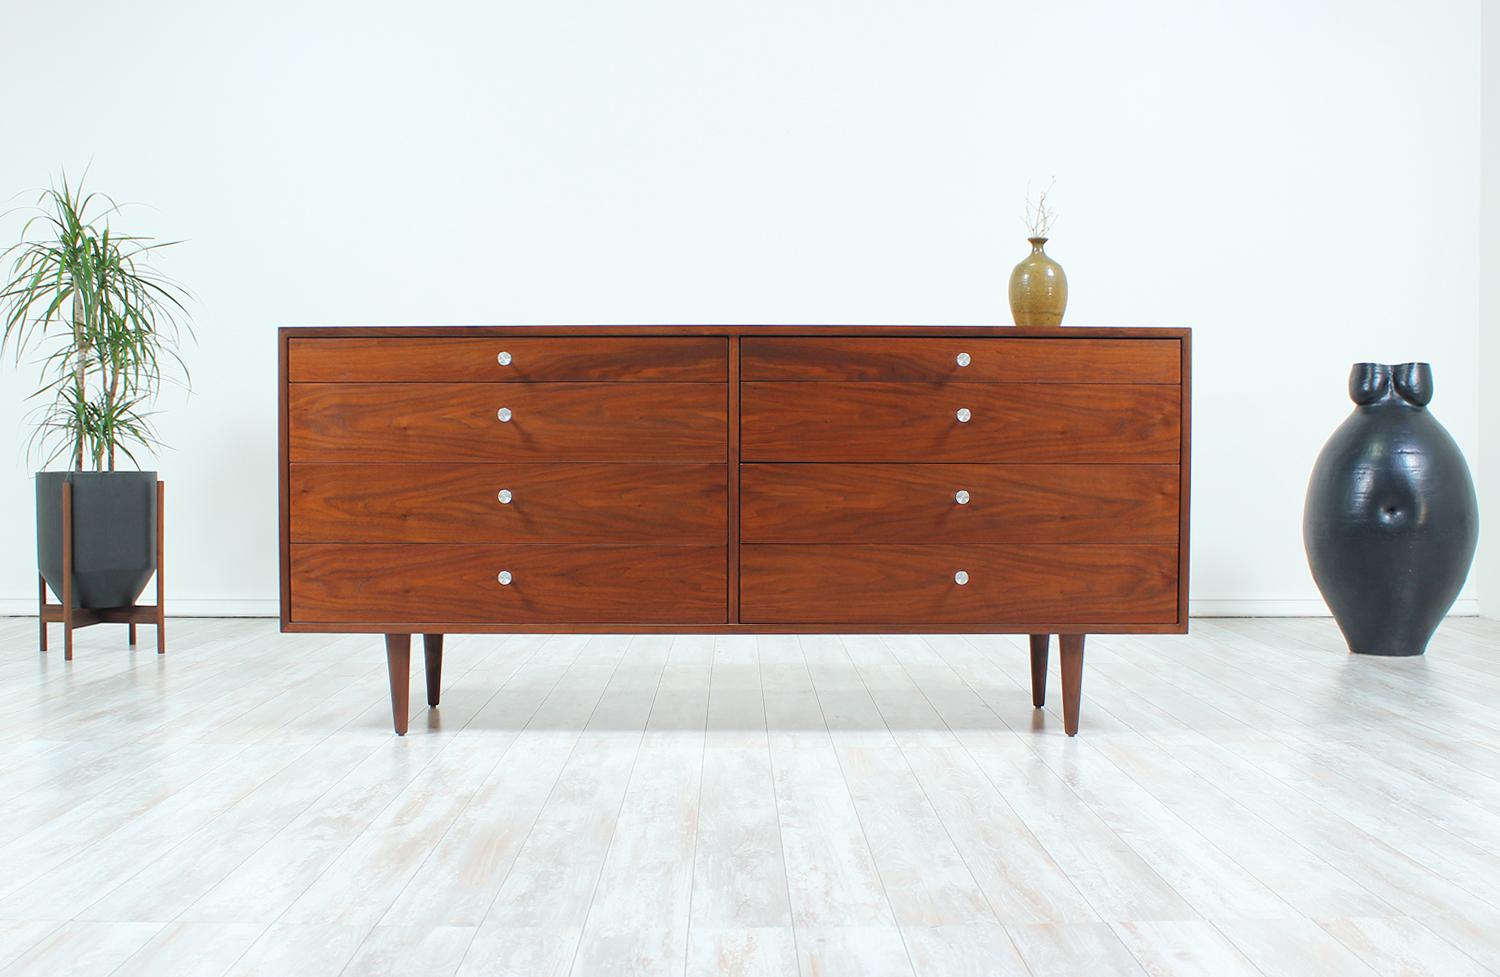 Mid Century modern dresser designed by Milo Baughman for Glenn of California in the United States circa 1950s. Newly refinished by our expert craftsmen, this spectacular eight-drawer dresser features a walnut-veneered case supported by tapered legs.